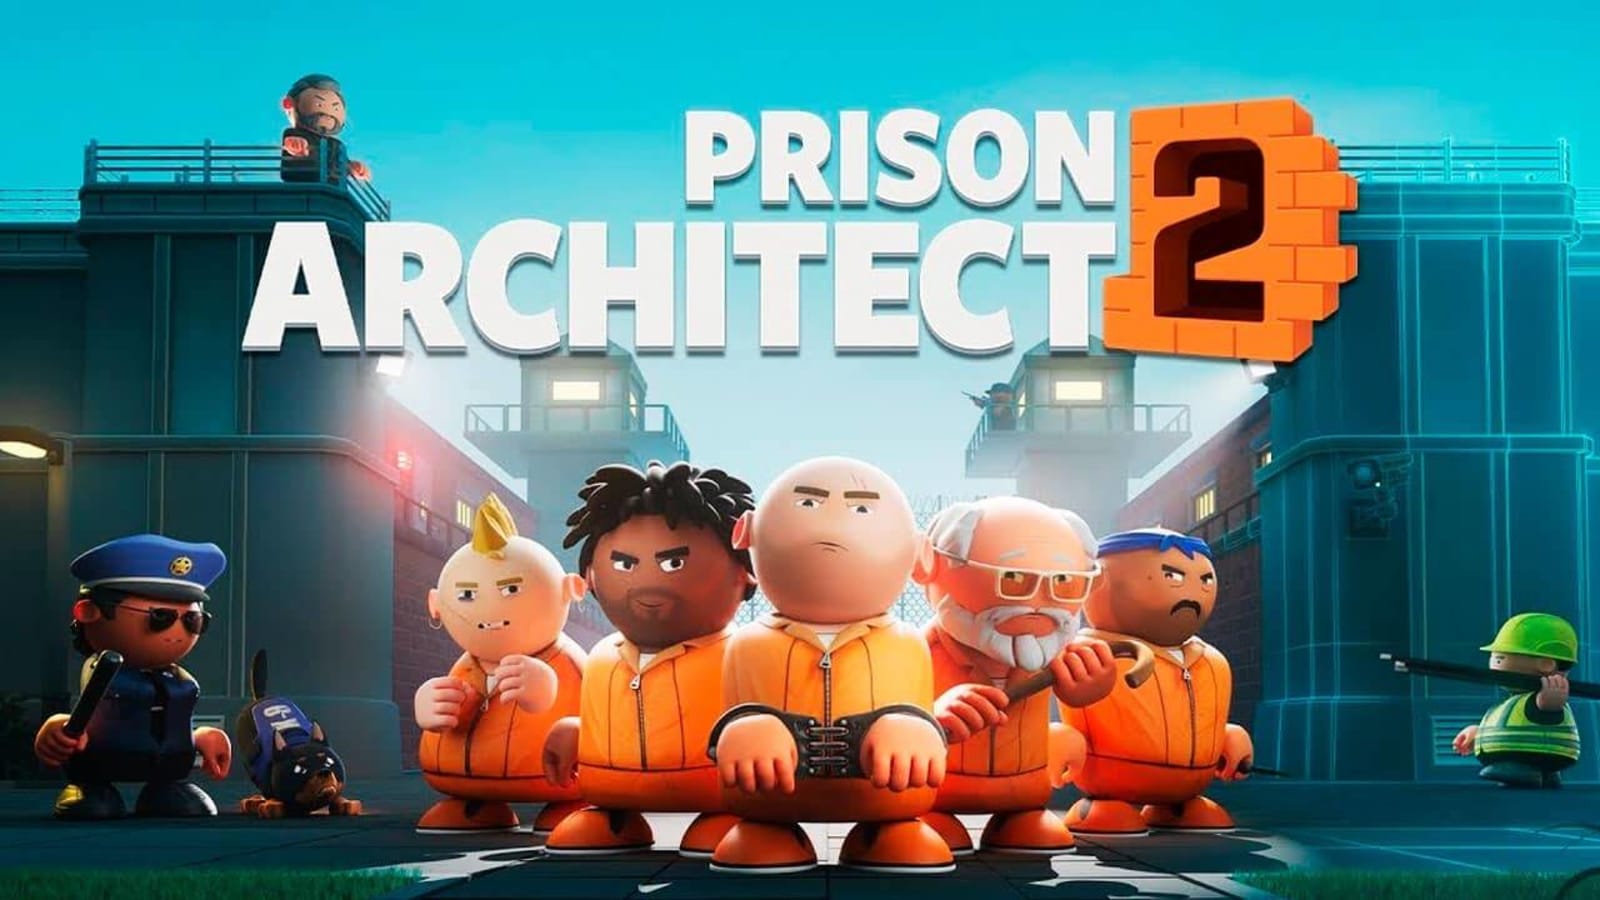 Prison Architect 2 Release Date, Gameplay, Story, Trailers